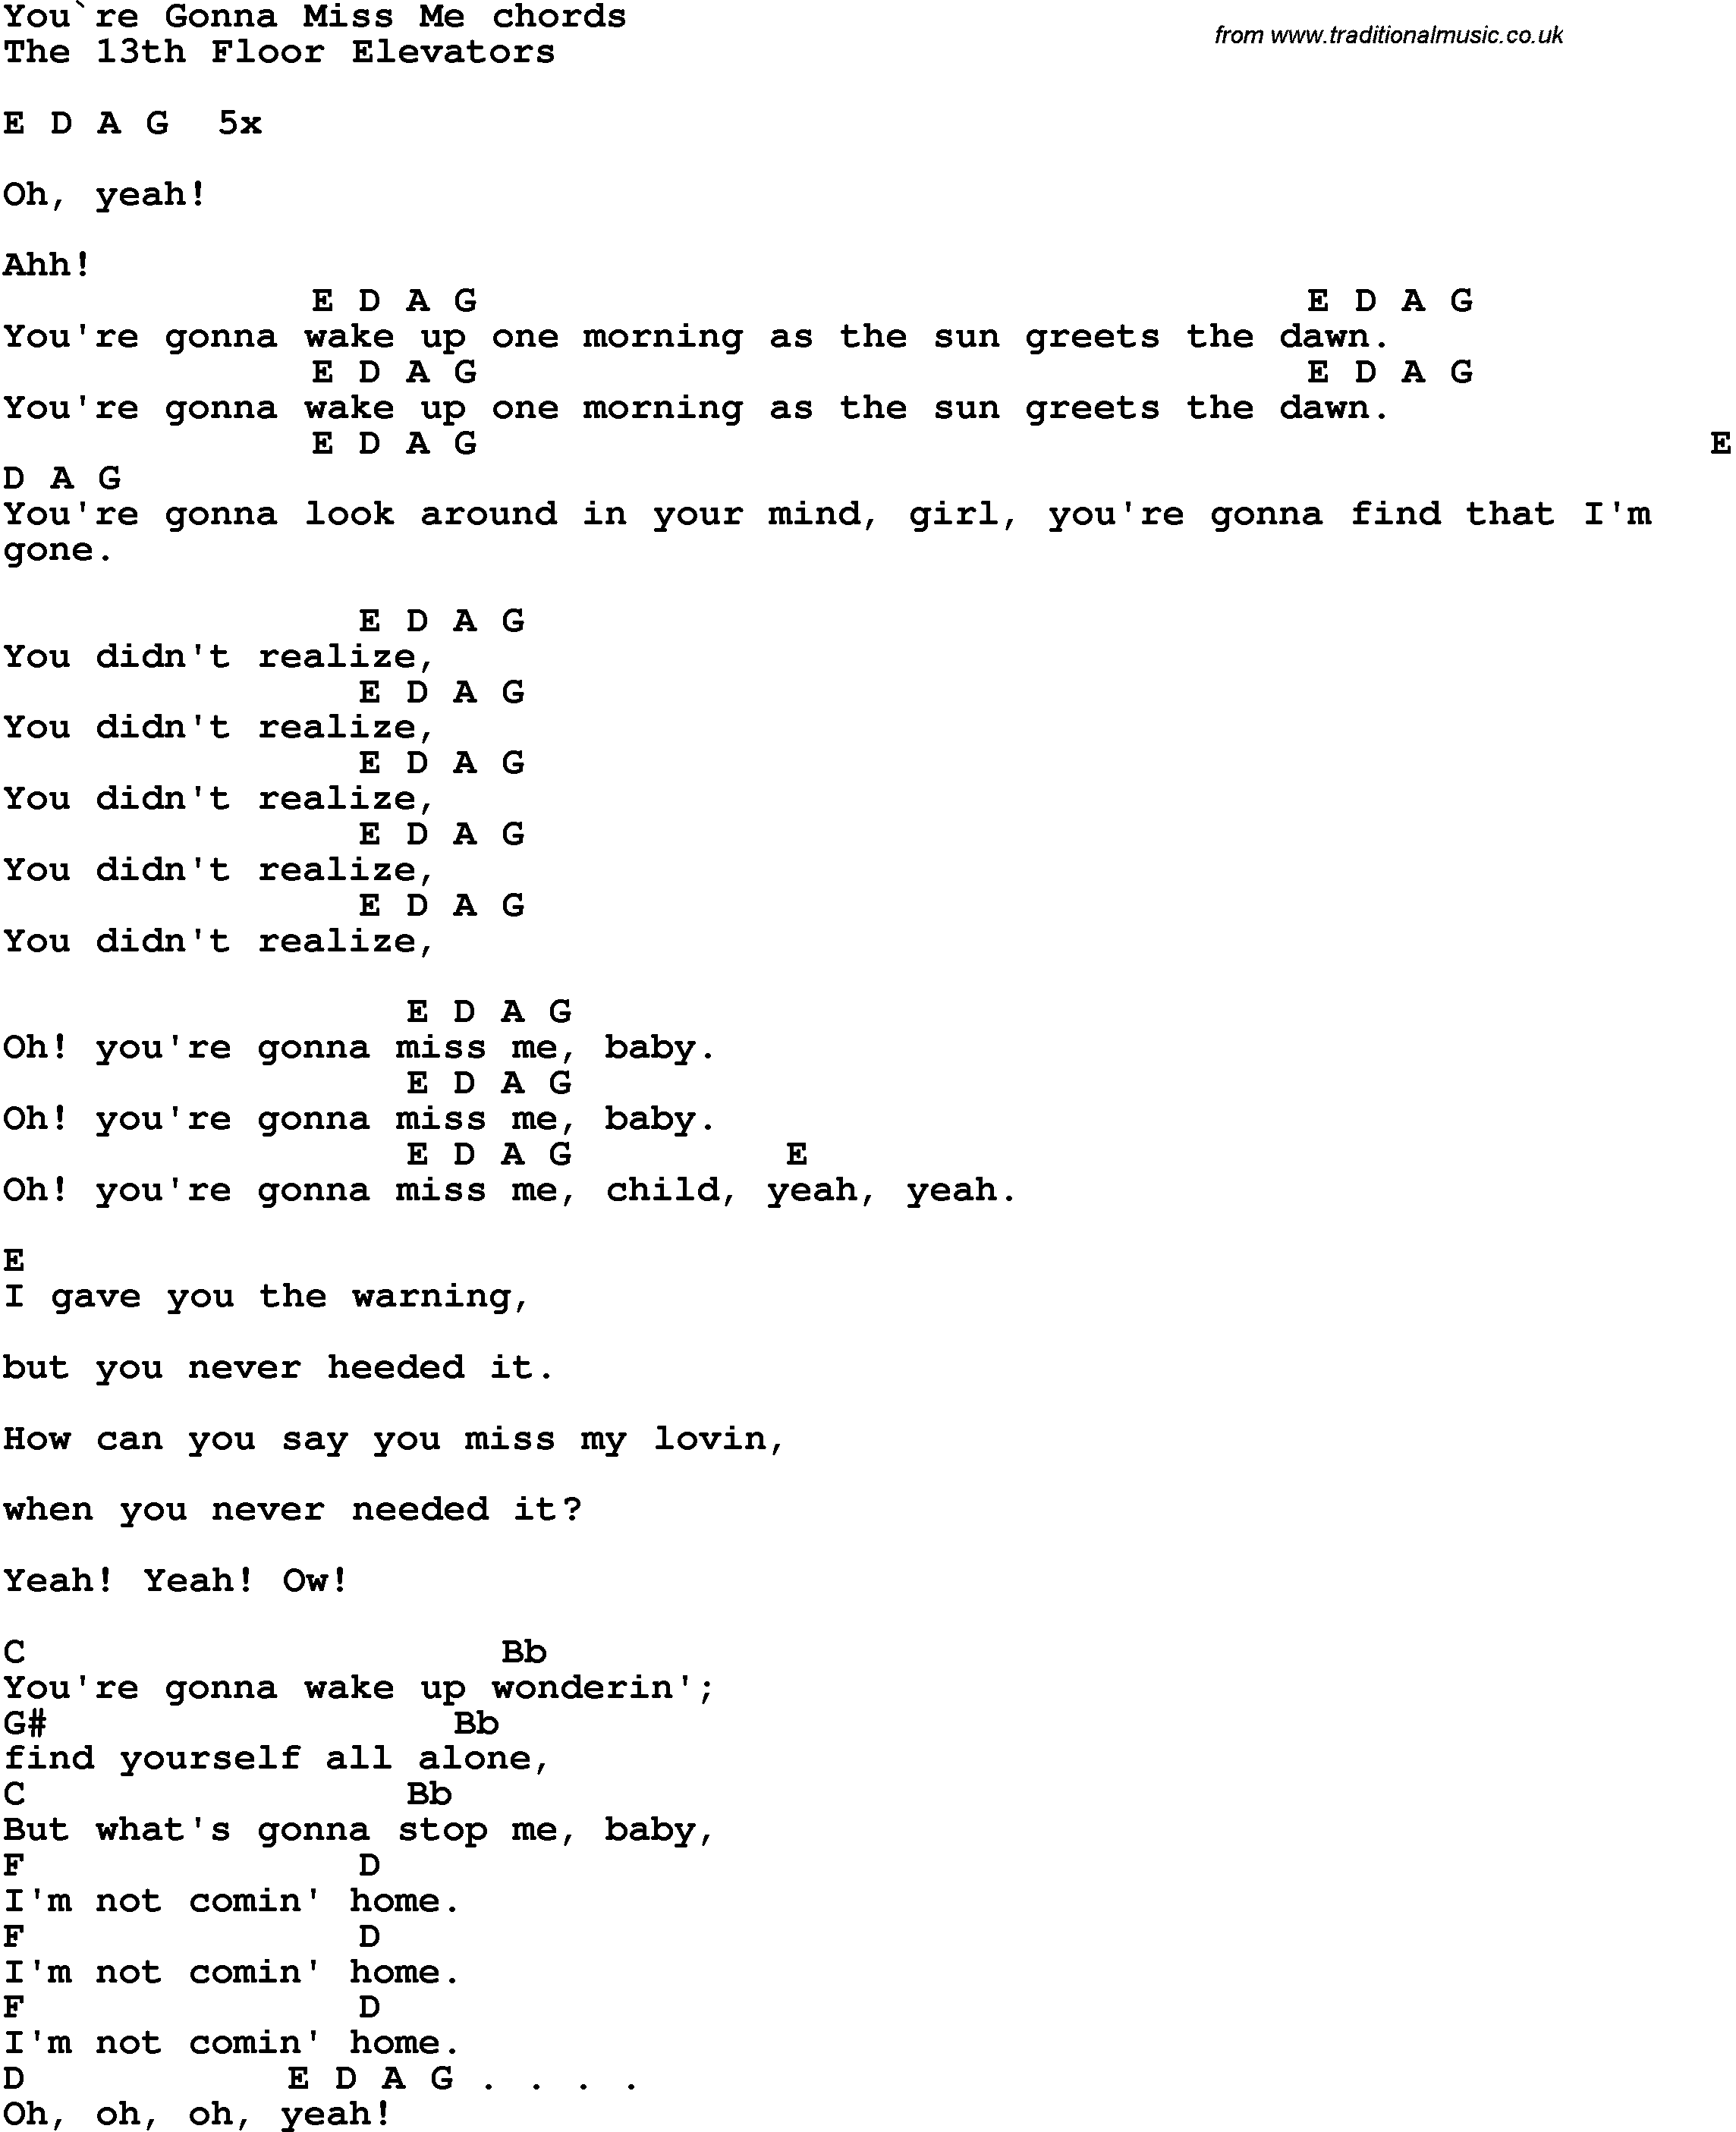 Song Lyrics with guitar chords for You're Gonna Miss Me